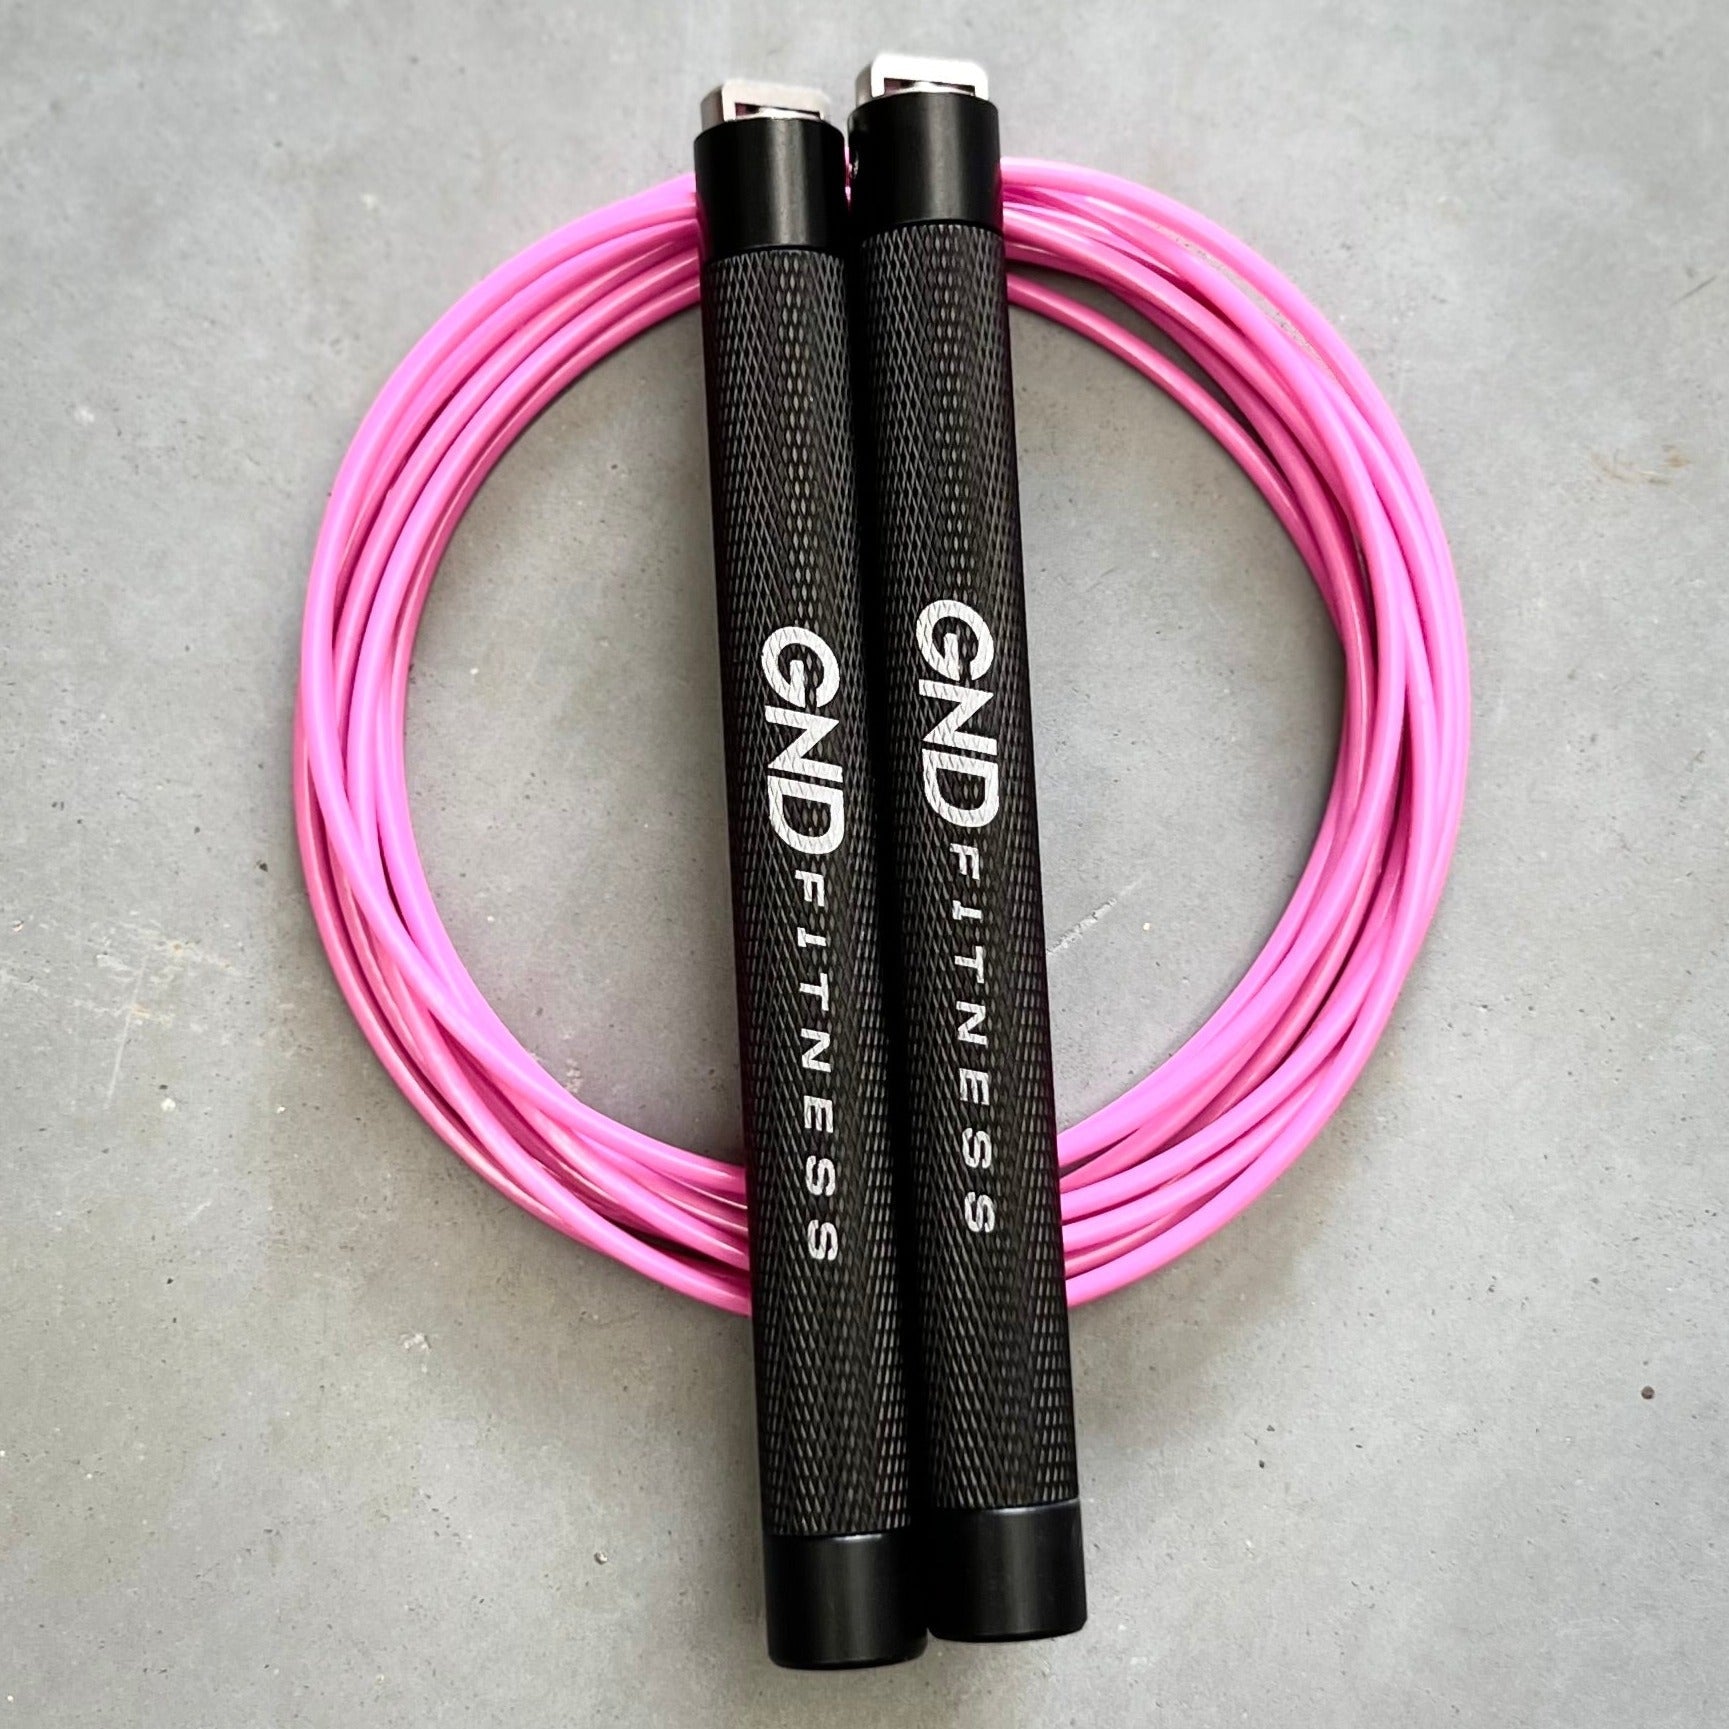 GND RF Alloy Speed Skipping Rope // Double Ball Bearing // Pink Punch - RF Skipping Rope- GND Fitness